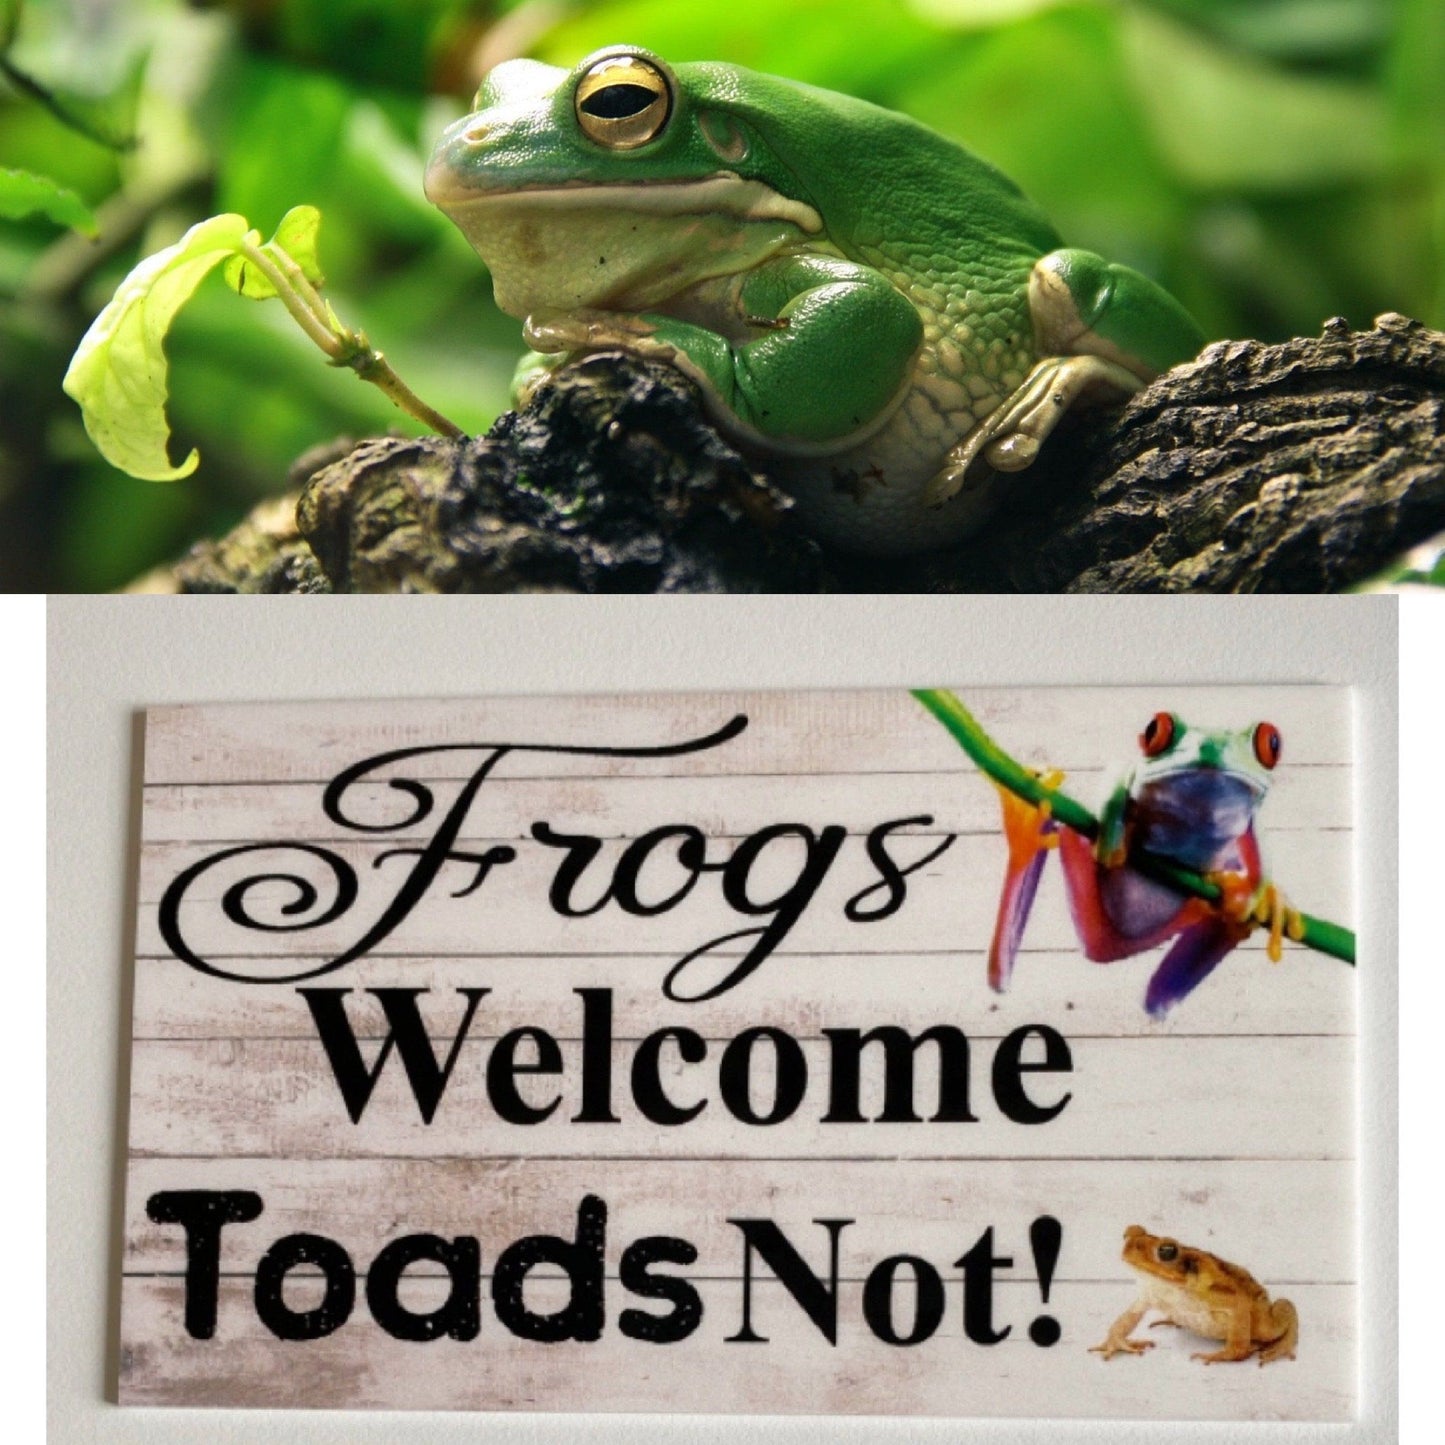 Frogs Frog Welcome Toads Not Sign